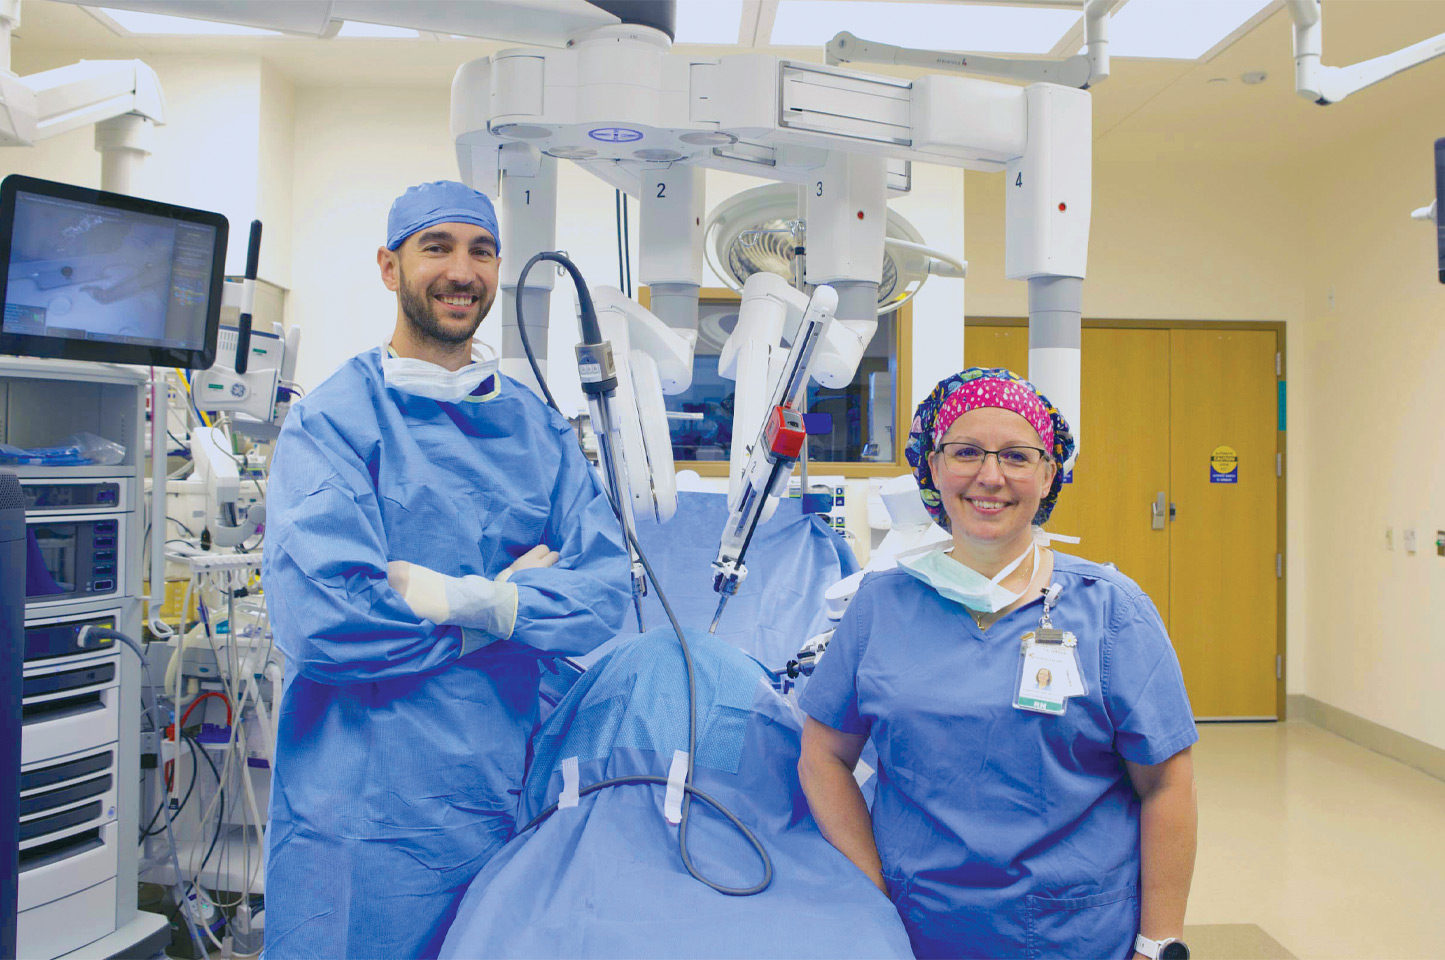 A surgeon and surgery director standing in an operating room on either side of a gurney with a surgical robot behind them